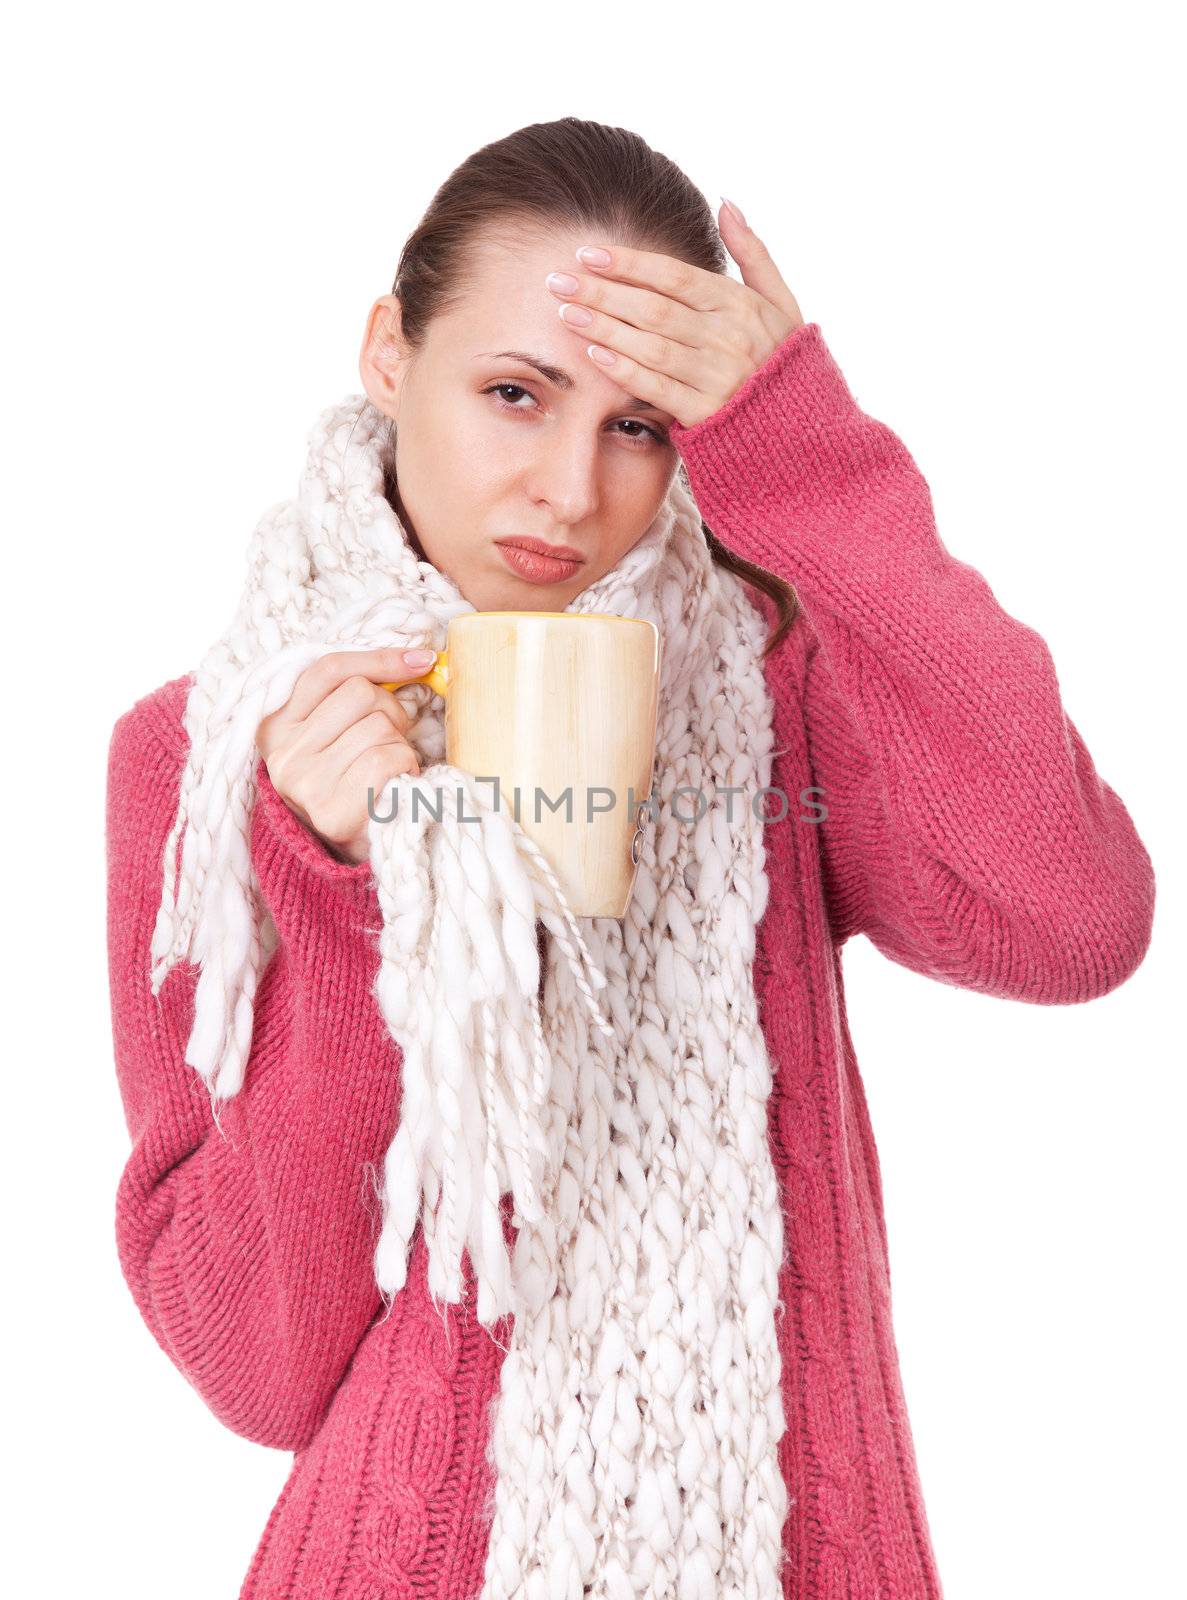 Sick woman with cup in winter sweater and scarf by iryna_rasko